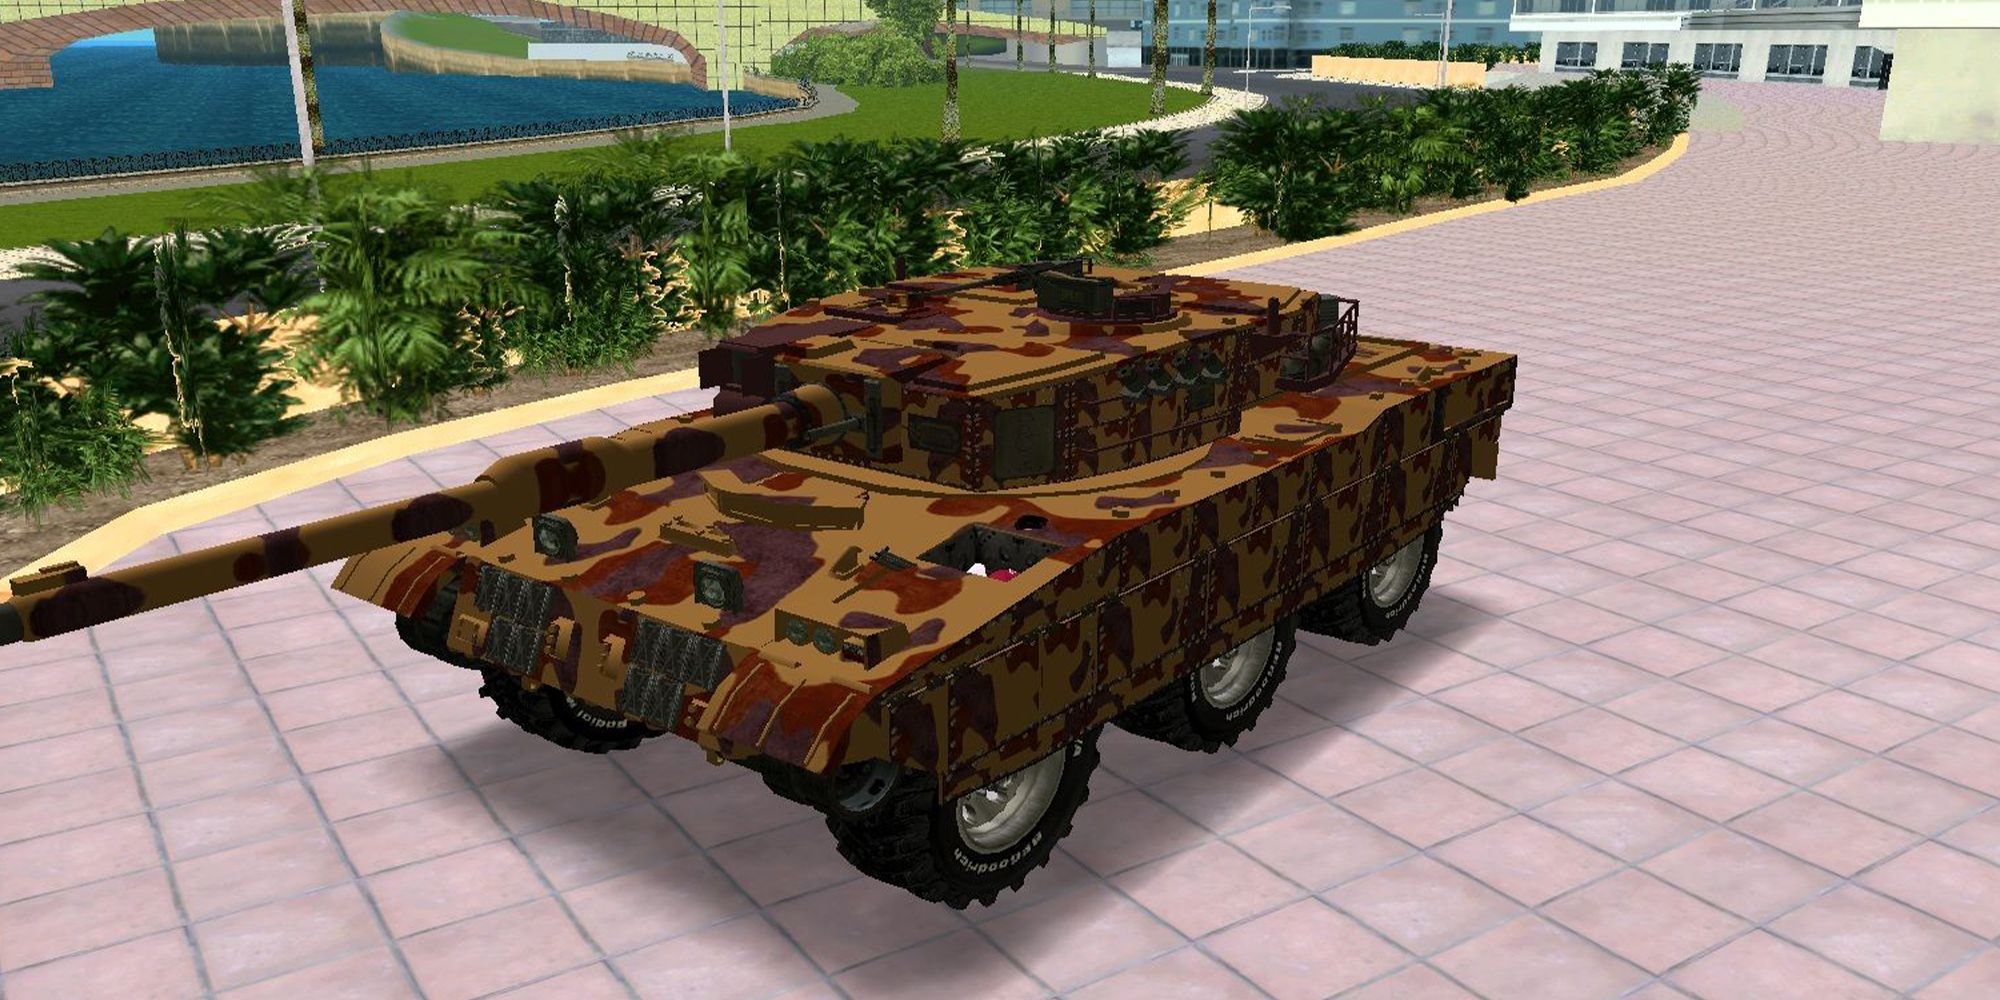 GTA Vice City: Where to get secret vehicles like the armored